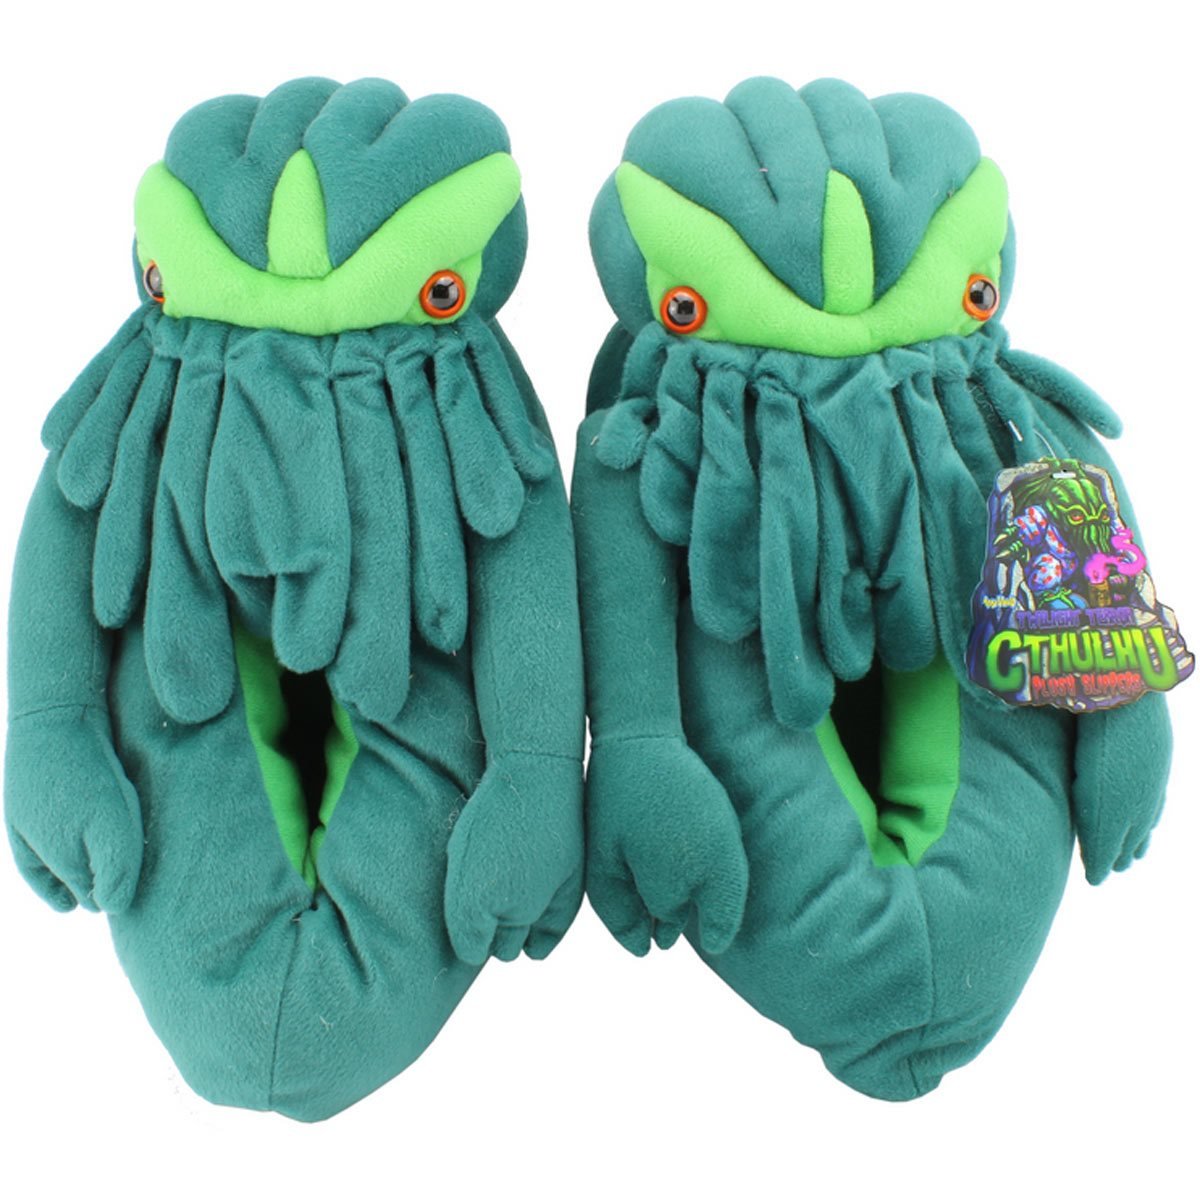 Cthulhu Twilight Terror Plush Slippers - The Fourth Place